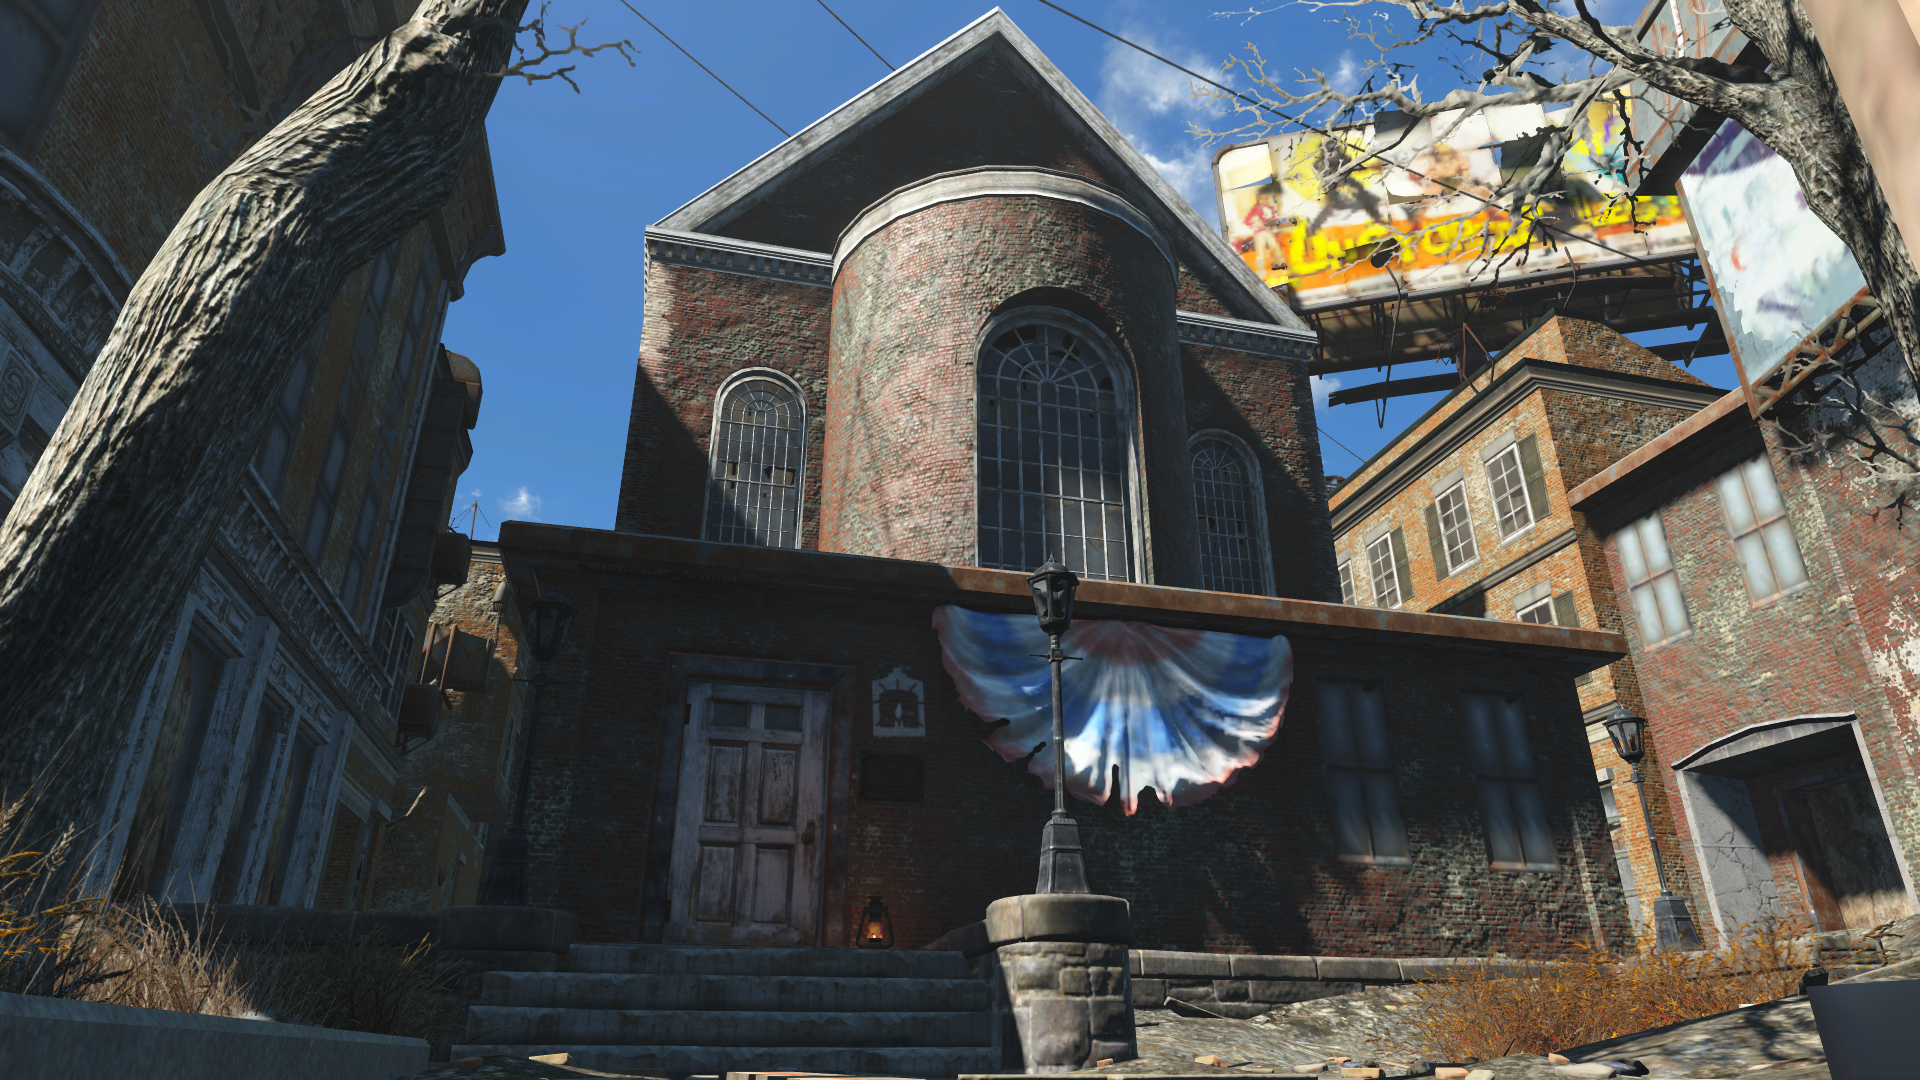 fallout 4 old north church on map